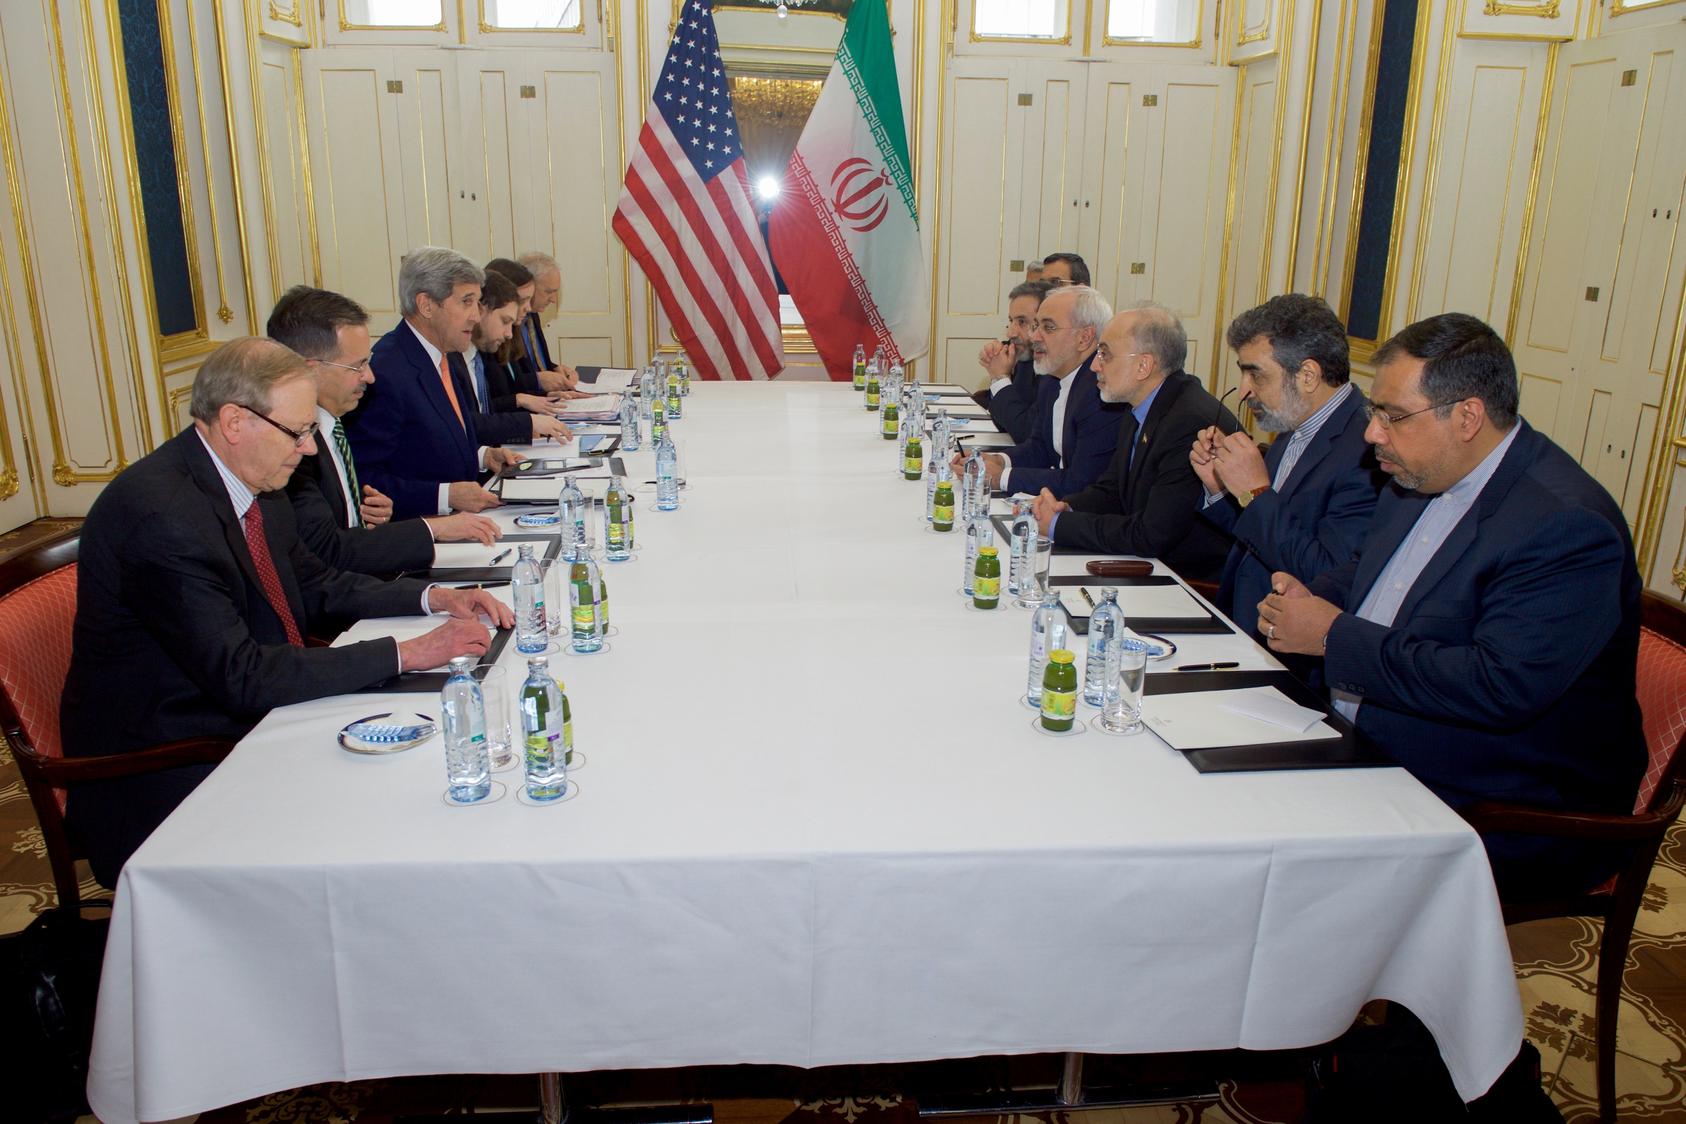 U.S. Secretary of State John Kerry, Iranian Foreign Minister Javad Zarif, and their respective advisers sit across from one another on January 16, 2016, at the Palais Coburg Hotel in Vienna, Austria, before a meeting about the implementation of the Joint Comprehensive Plan of Action outlining the shape of Iran's nuclear program.